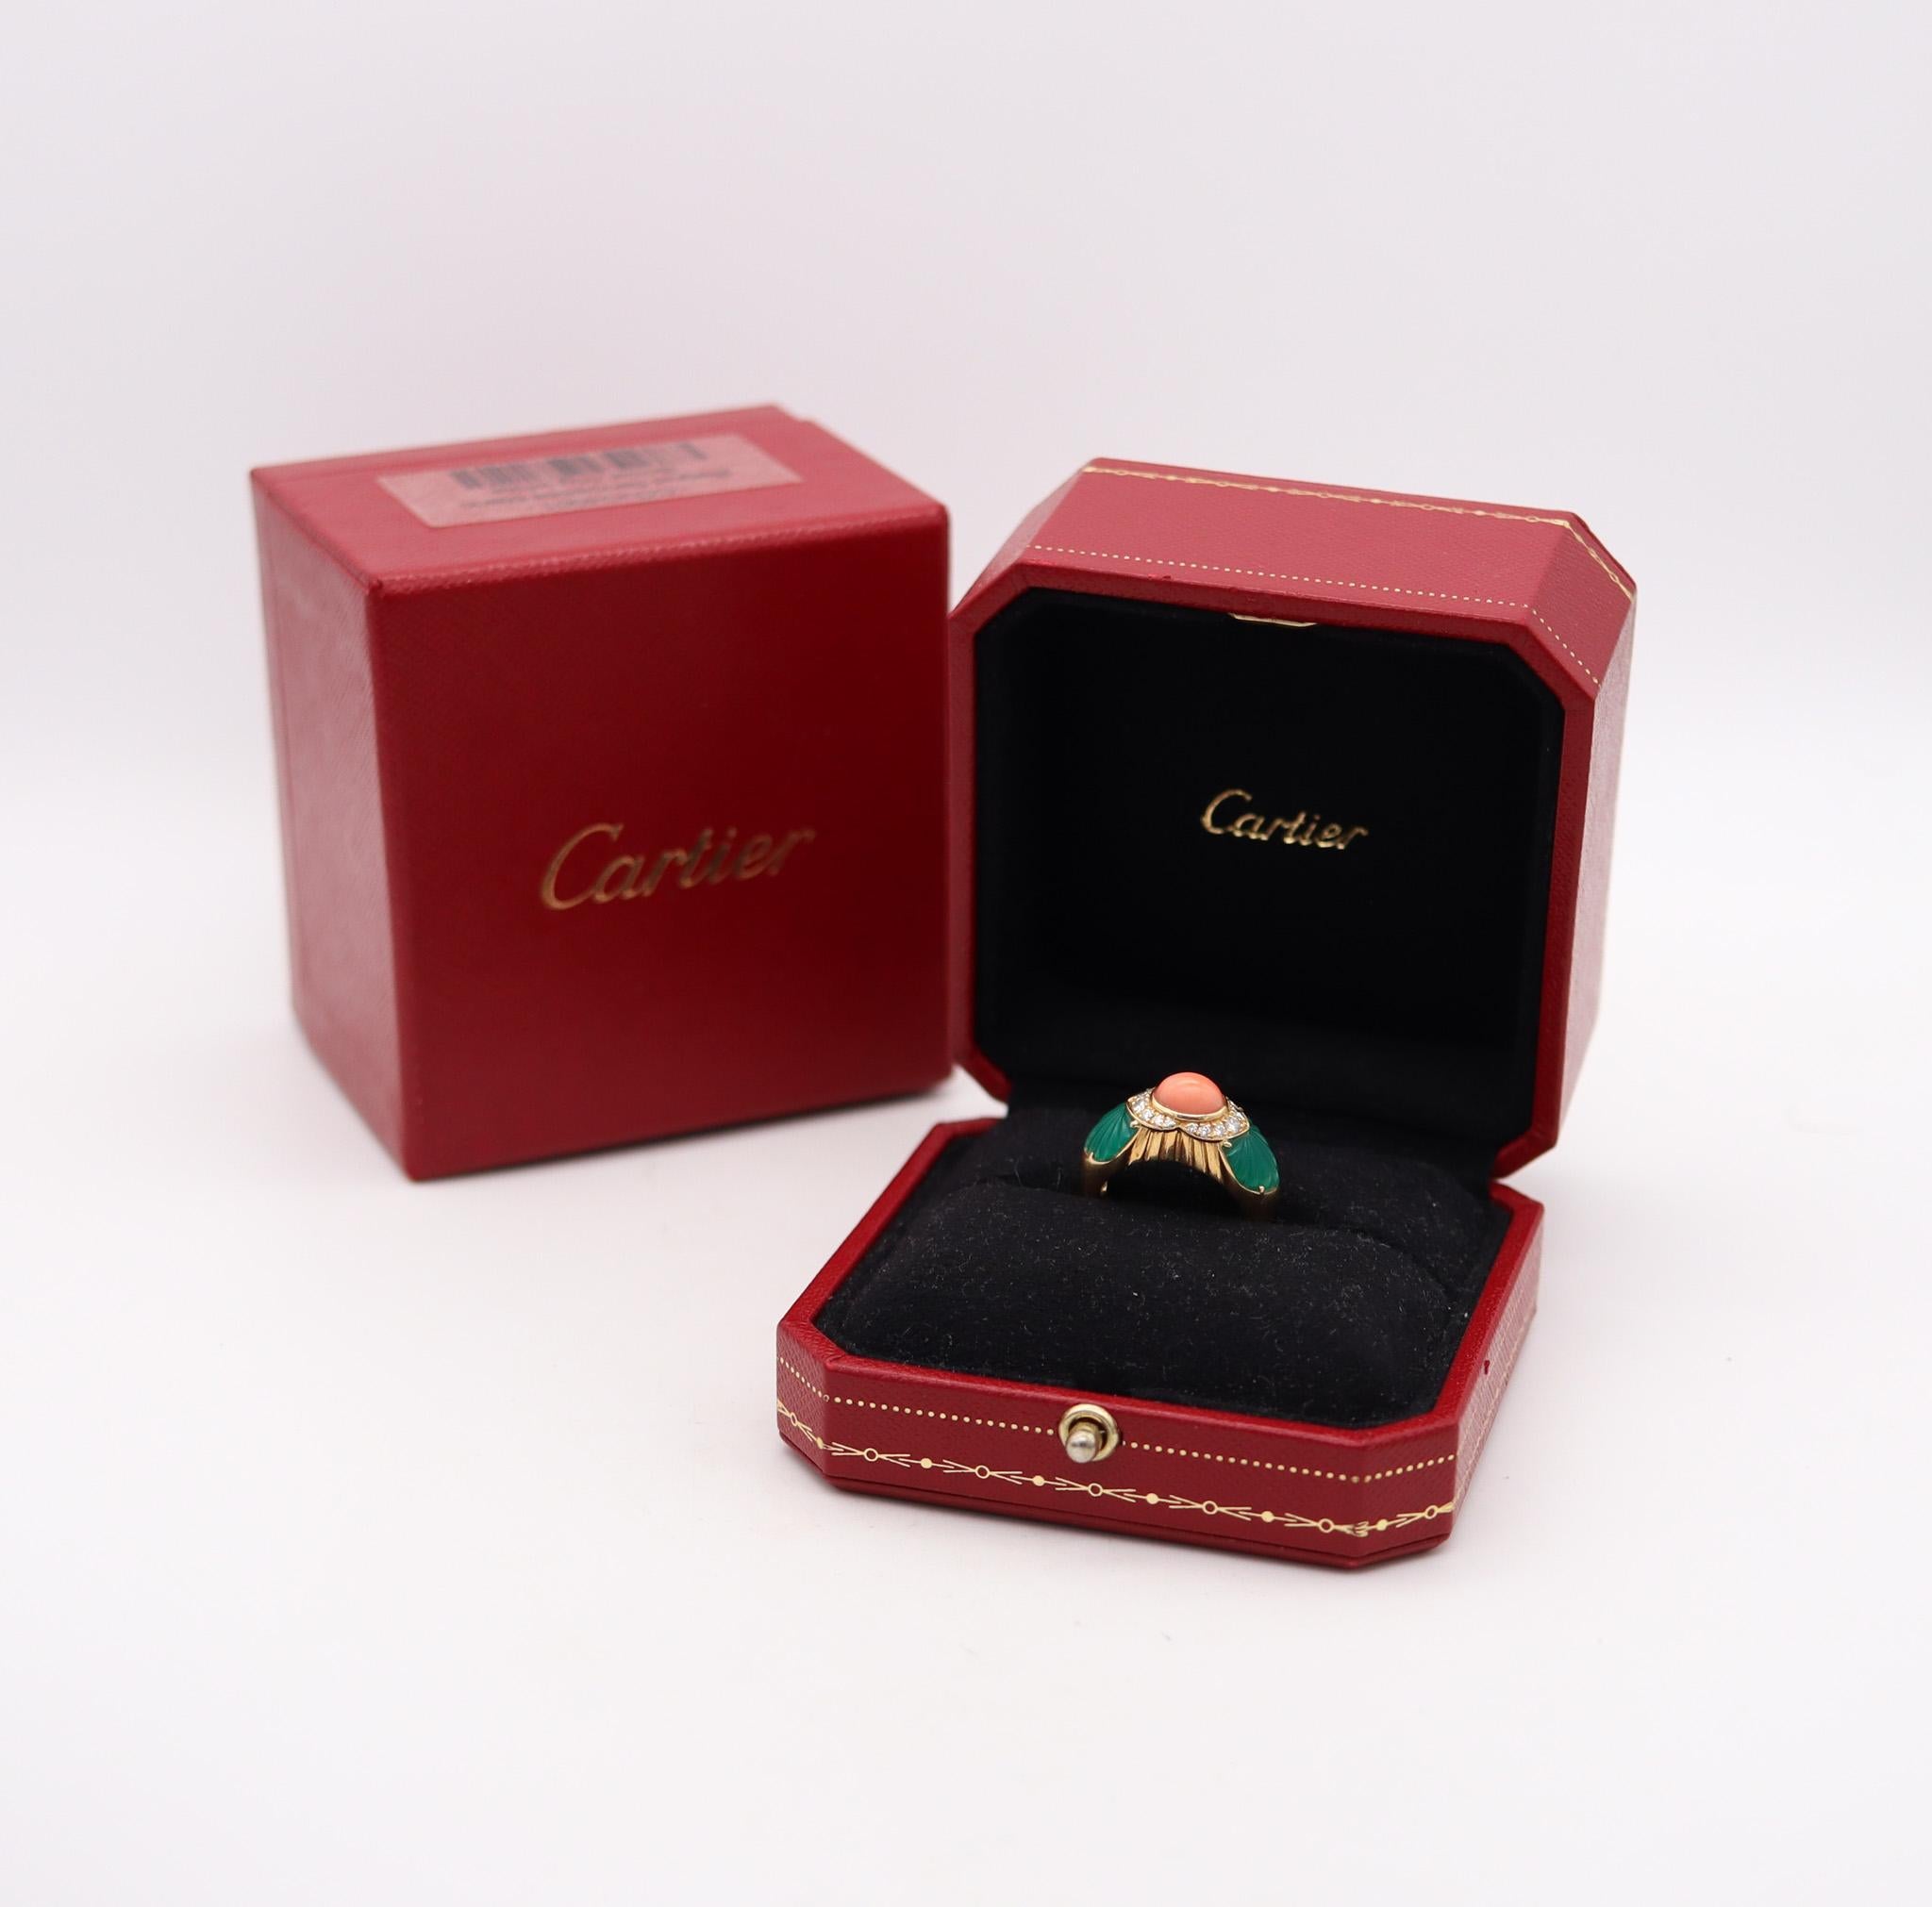 A cocktail ring designed by Cartier.

Gorgeous colorful cocktail ring, created in Paris France by the jewelry house of Cartier, back in the 1990. This stunning cocktail ring has been crafted with a bombe shape in solid yellow gold of 18 karats with